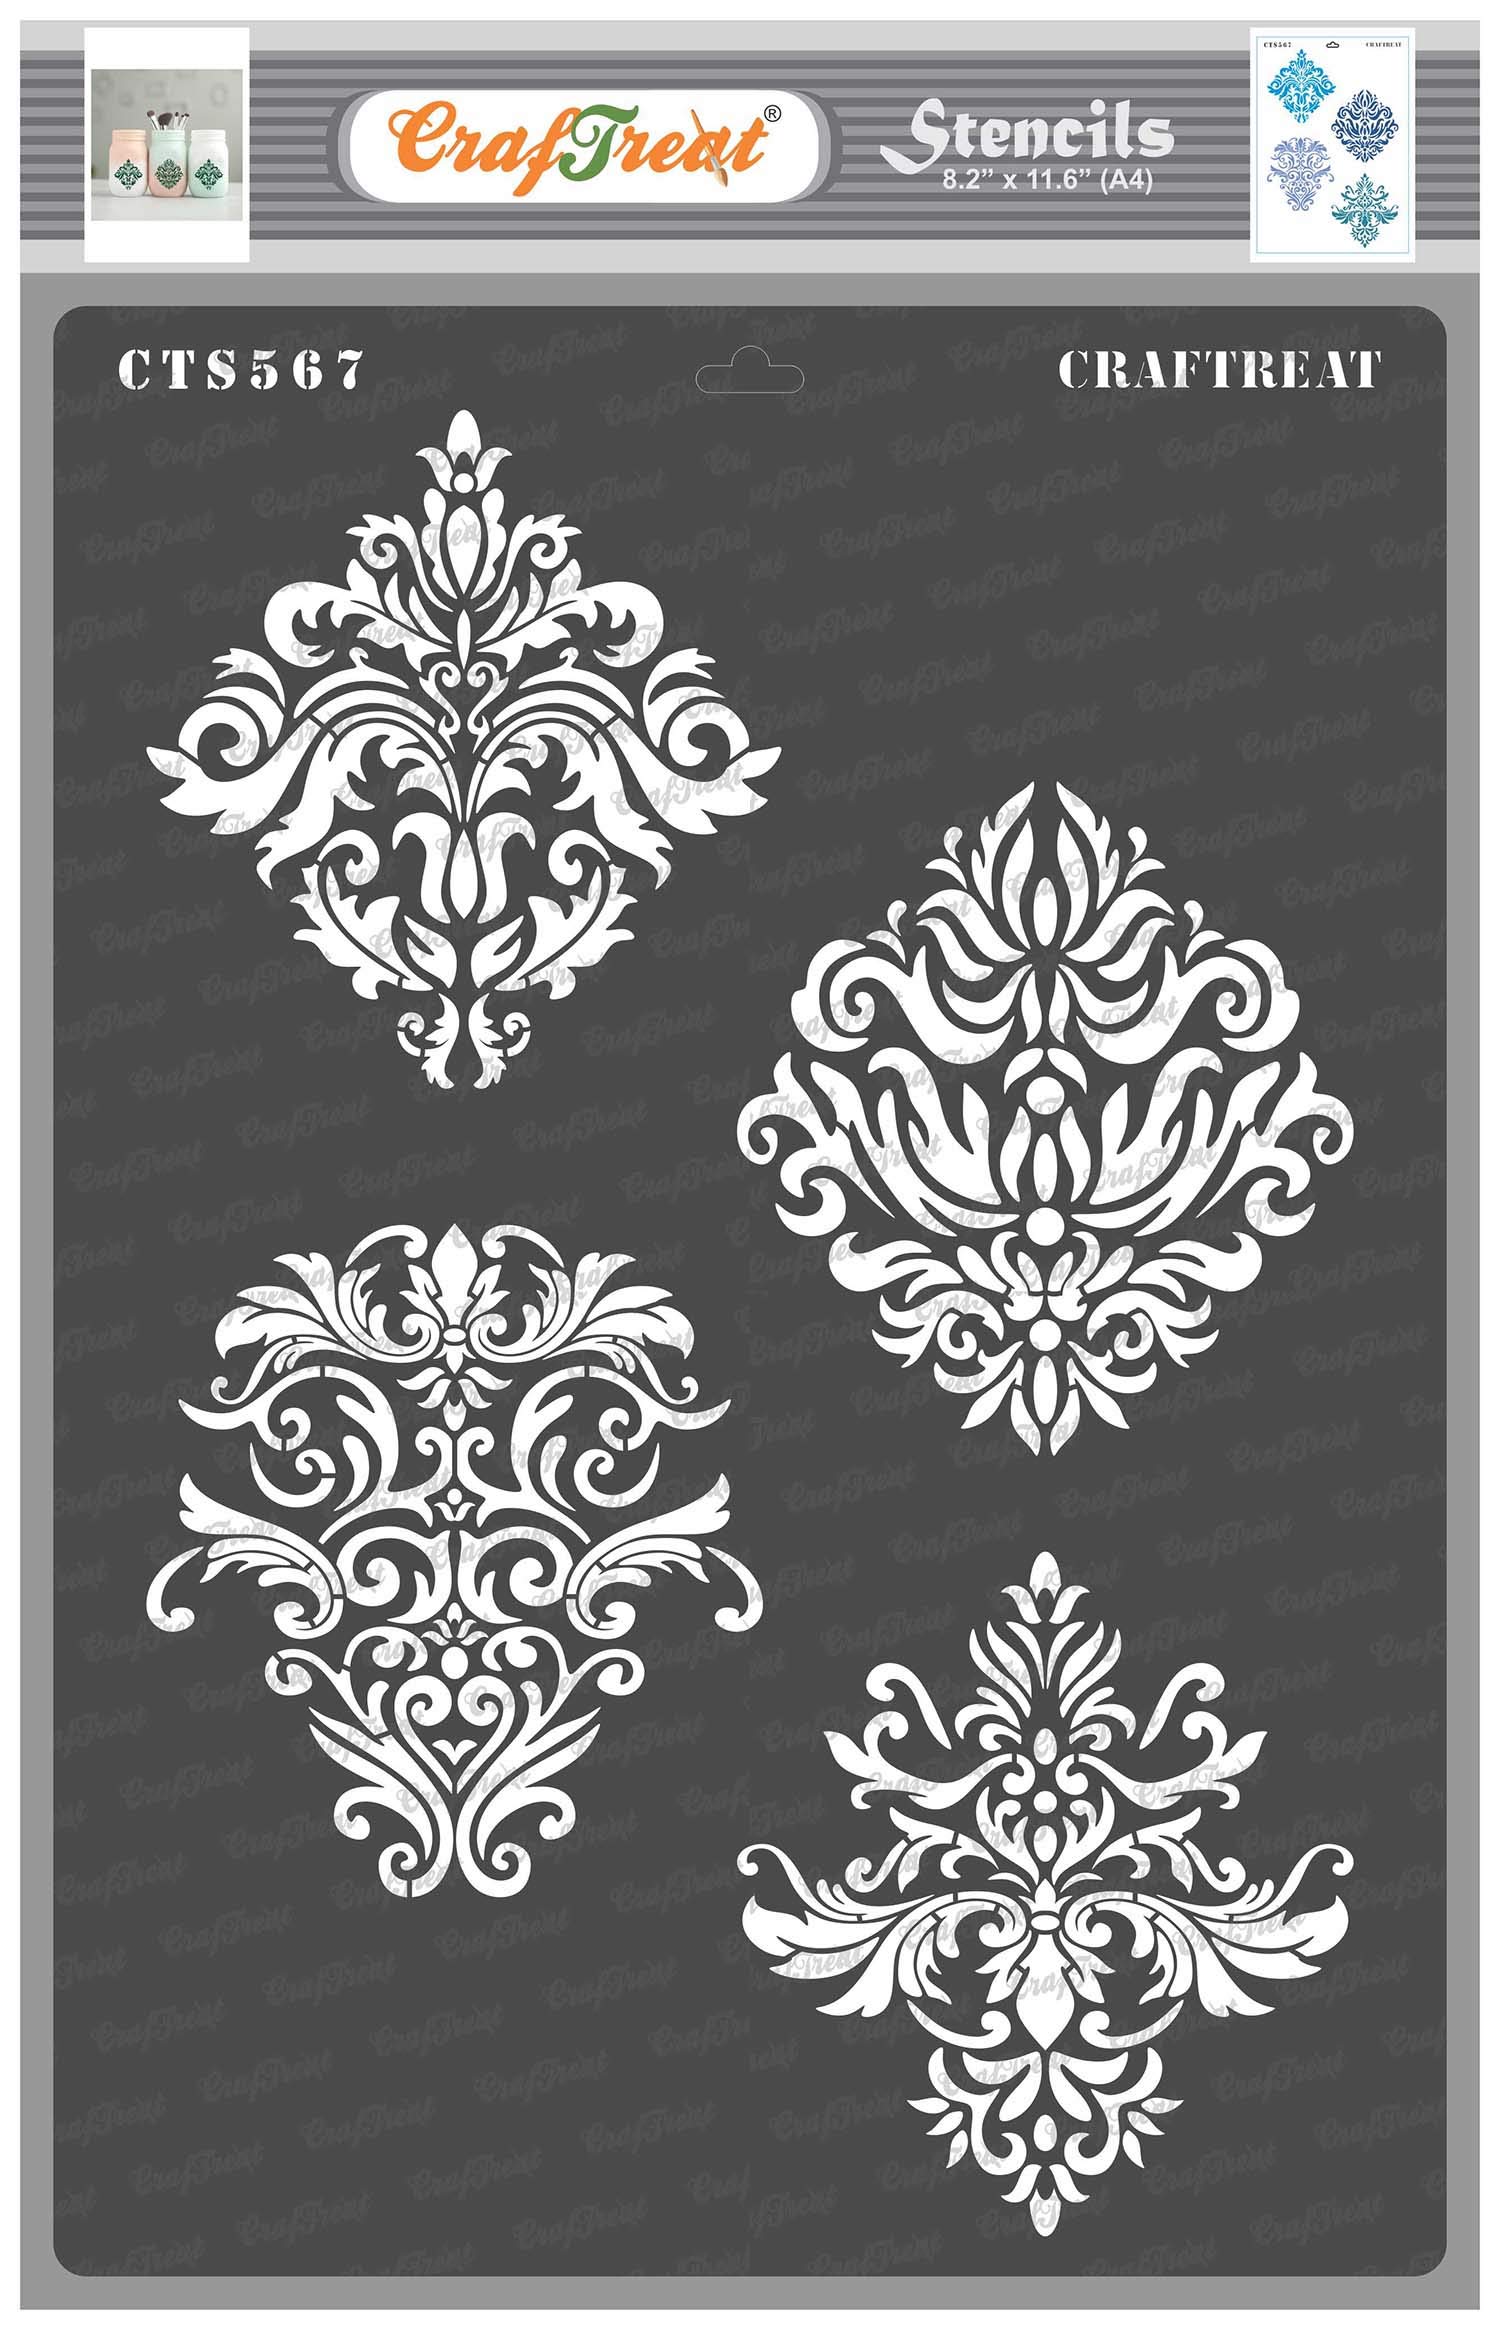 CrafTreat Damask Stencils for Painting on Wood Canvas Paper Fabric Floor  Wall and Tile - Damask Designs - Size: A4 (8.3 x 11.7 Inch) - Reusable DIY  Art and Craft Stencils 